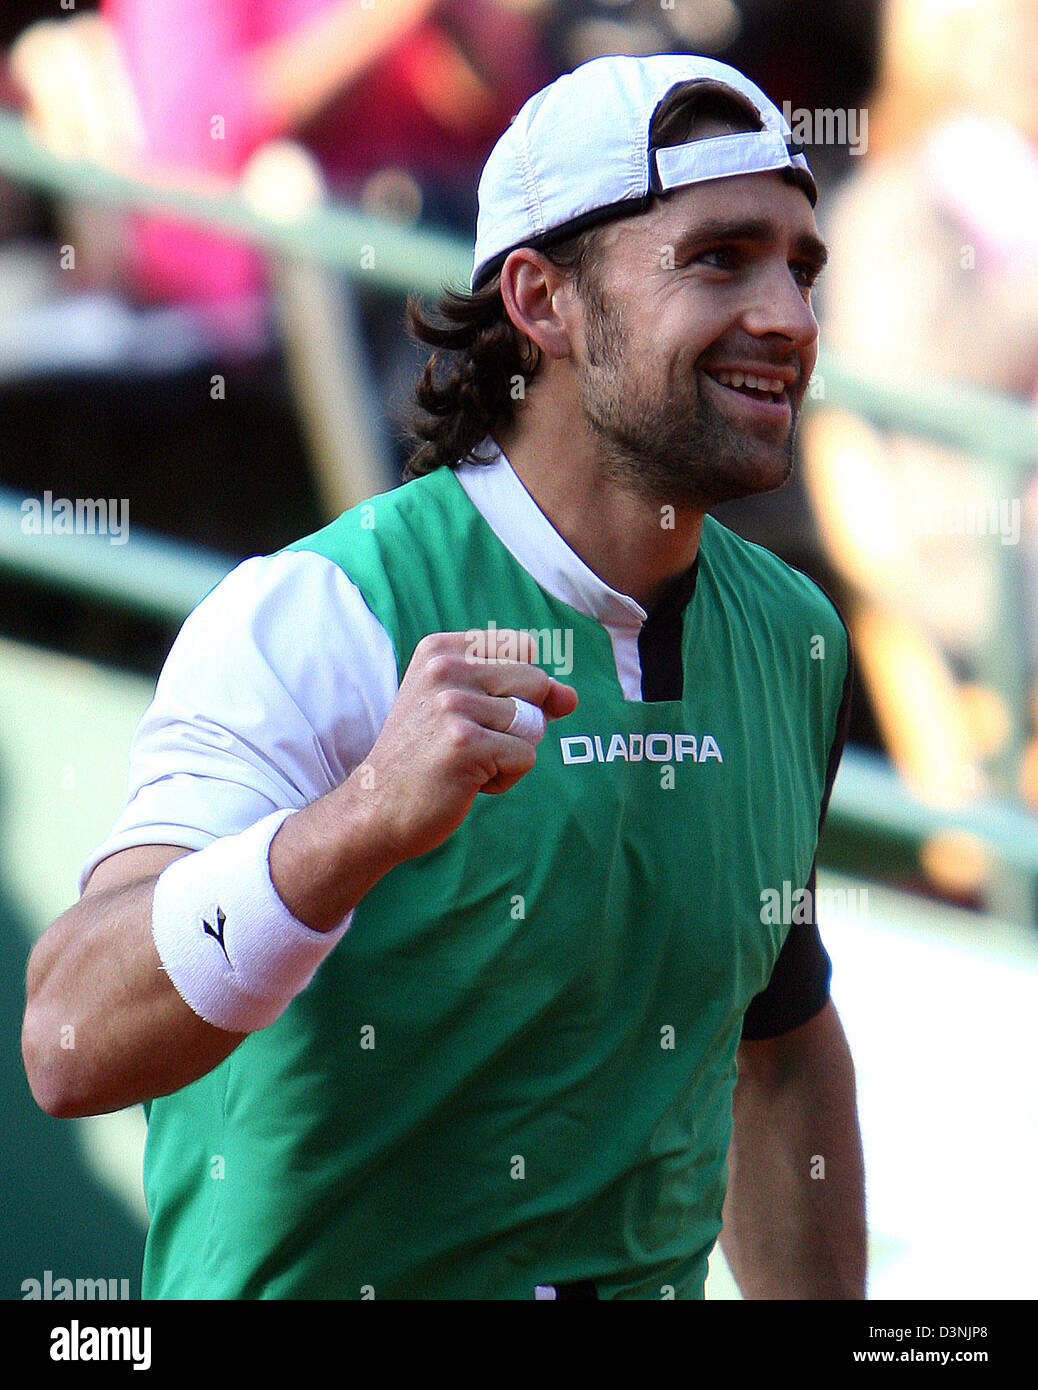 German tennis pro Nicolas Kiefer celebrates his victory over Argentinian Gaudio after the Tennis World Team Cup match in Duesseldorf, Germany, Tuesday, 23 May 2006. Photo: Achim Scheidemann Stock Photo